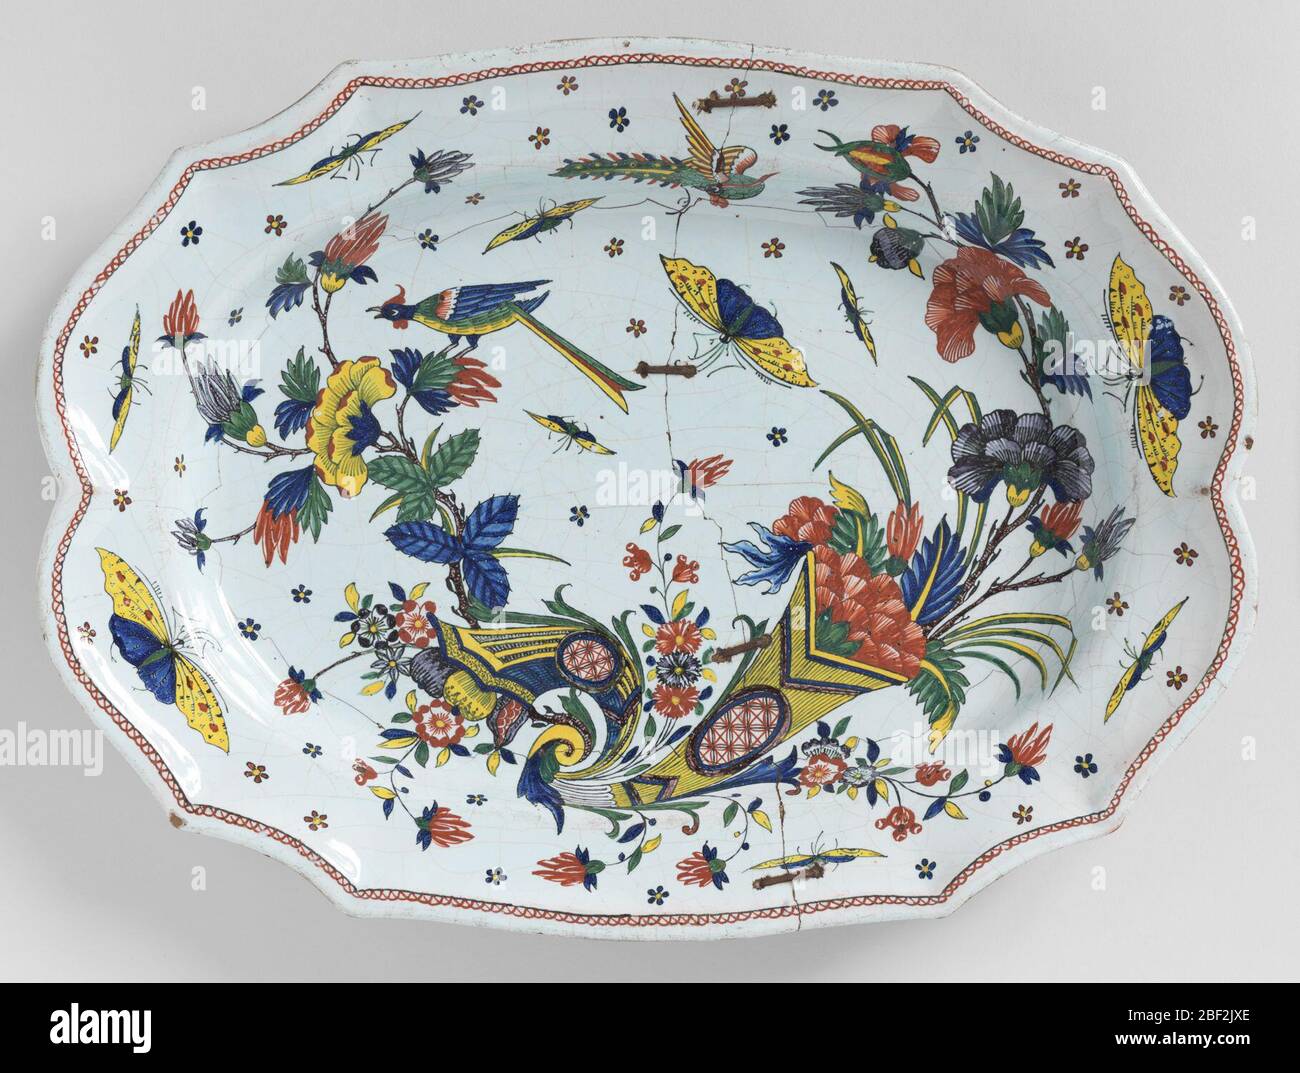 Platter. Irregular scalloped border, oval cavetto. Decoration in Chinese style. Double cornucopia with flowers, large insects and a long-tailed bird Stock Photo